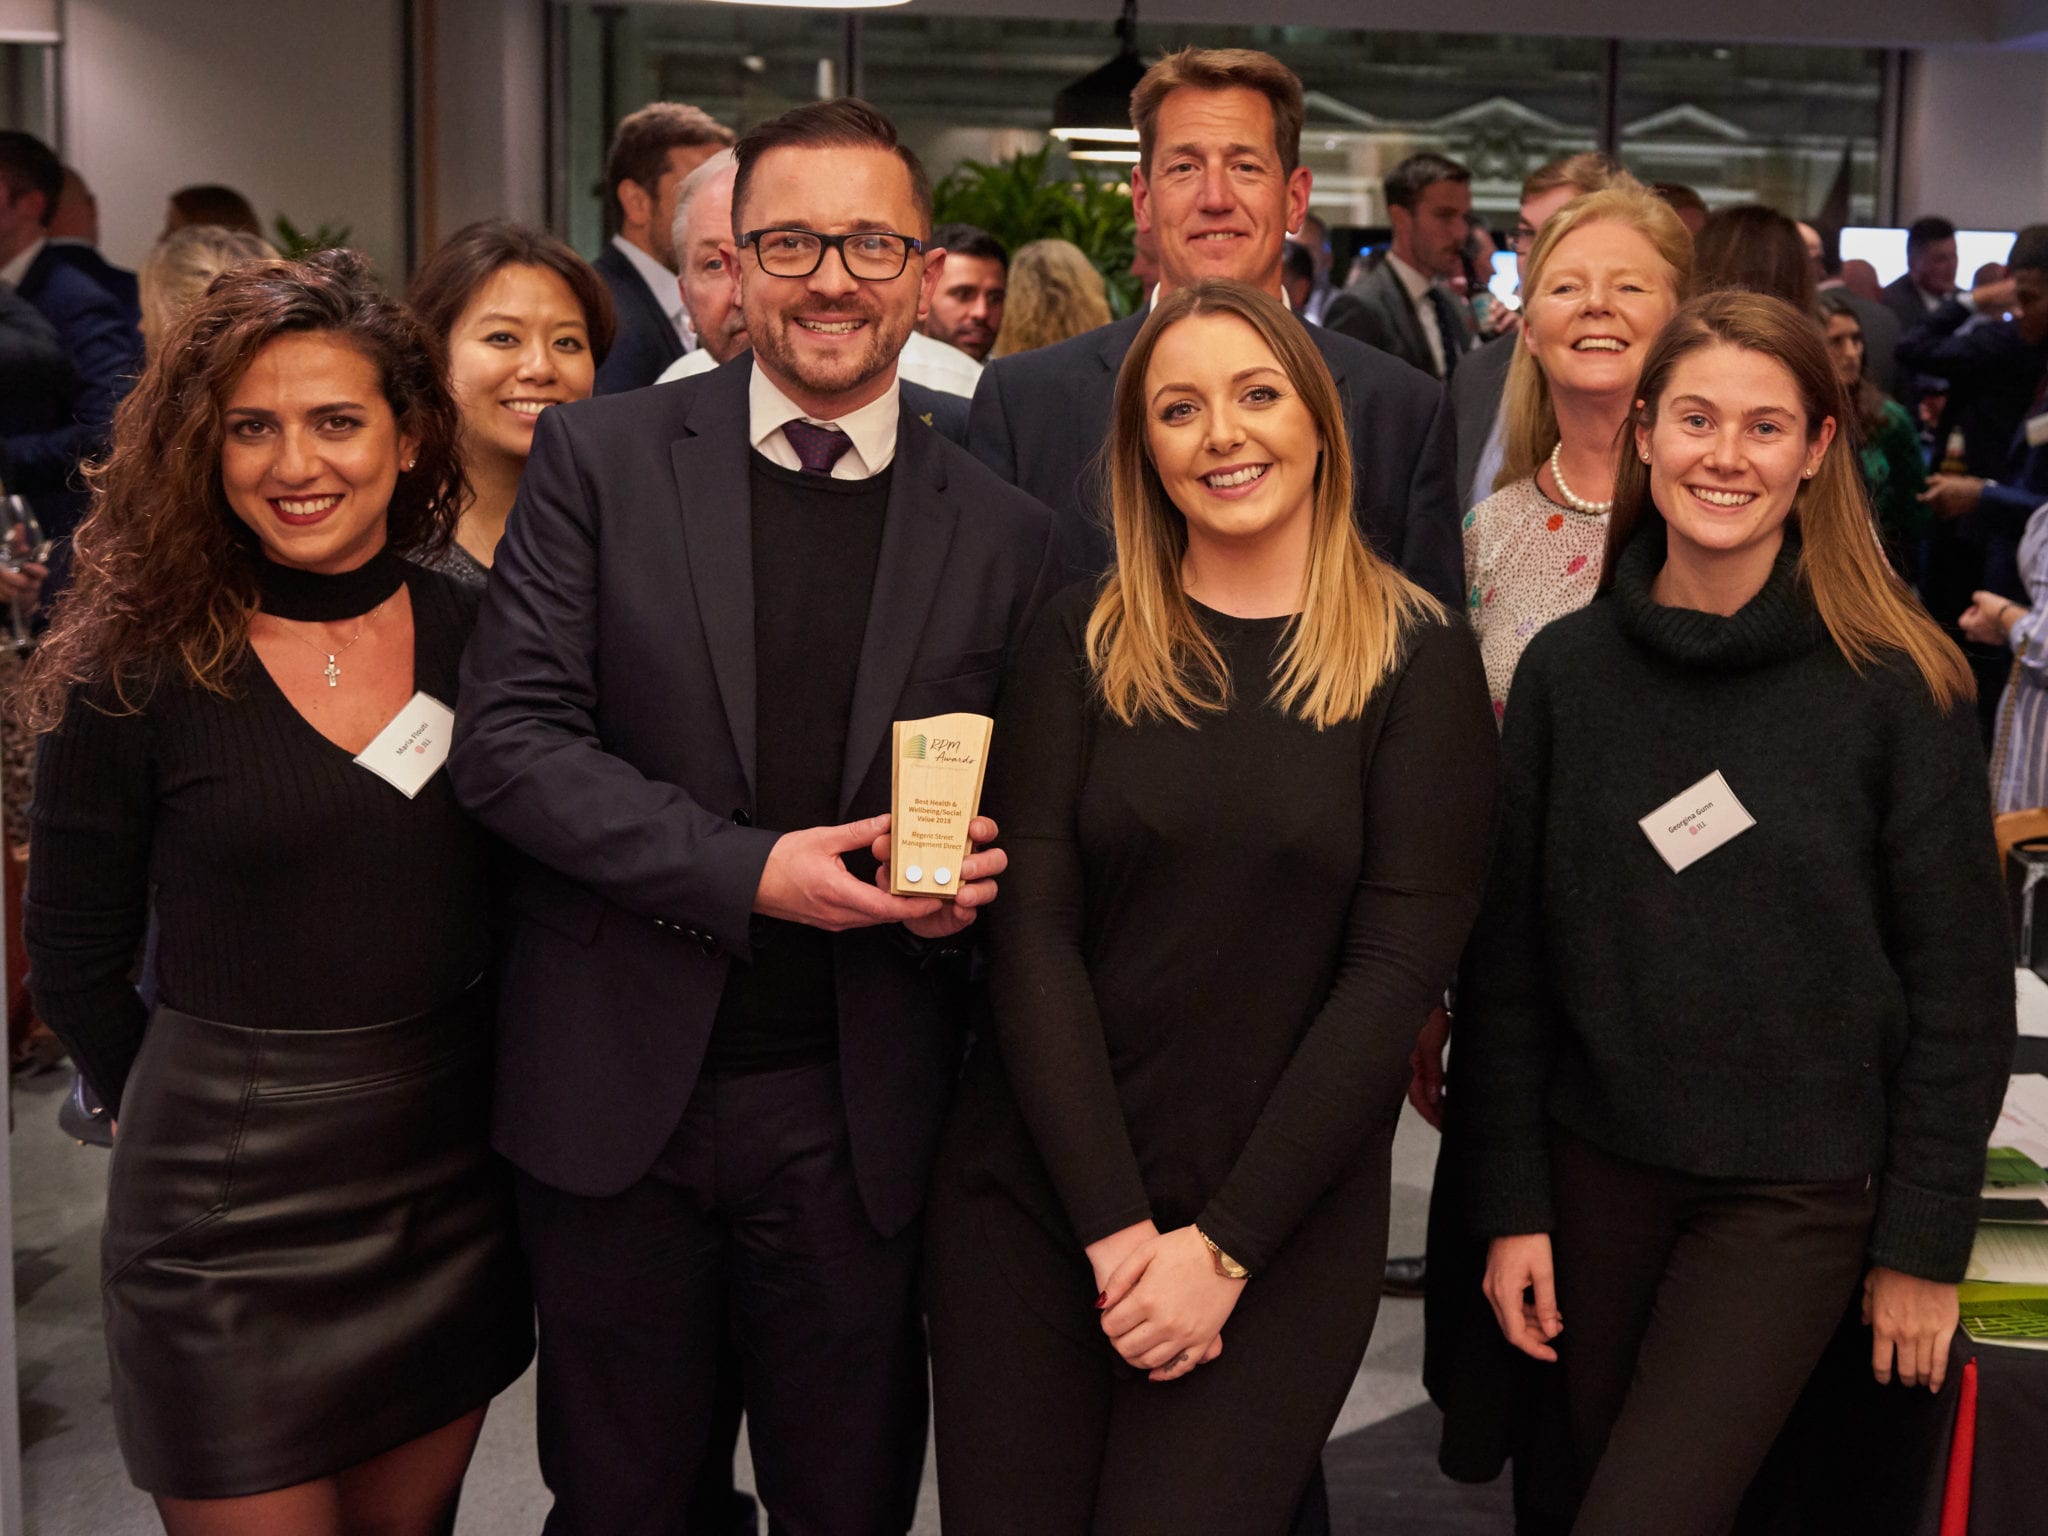 RSMD wins Best Health and Wellbeing Award! - My Central London